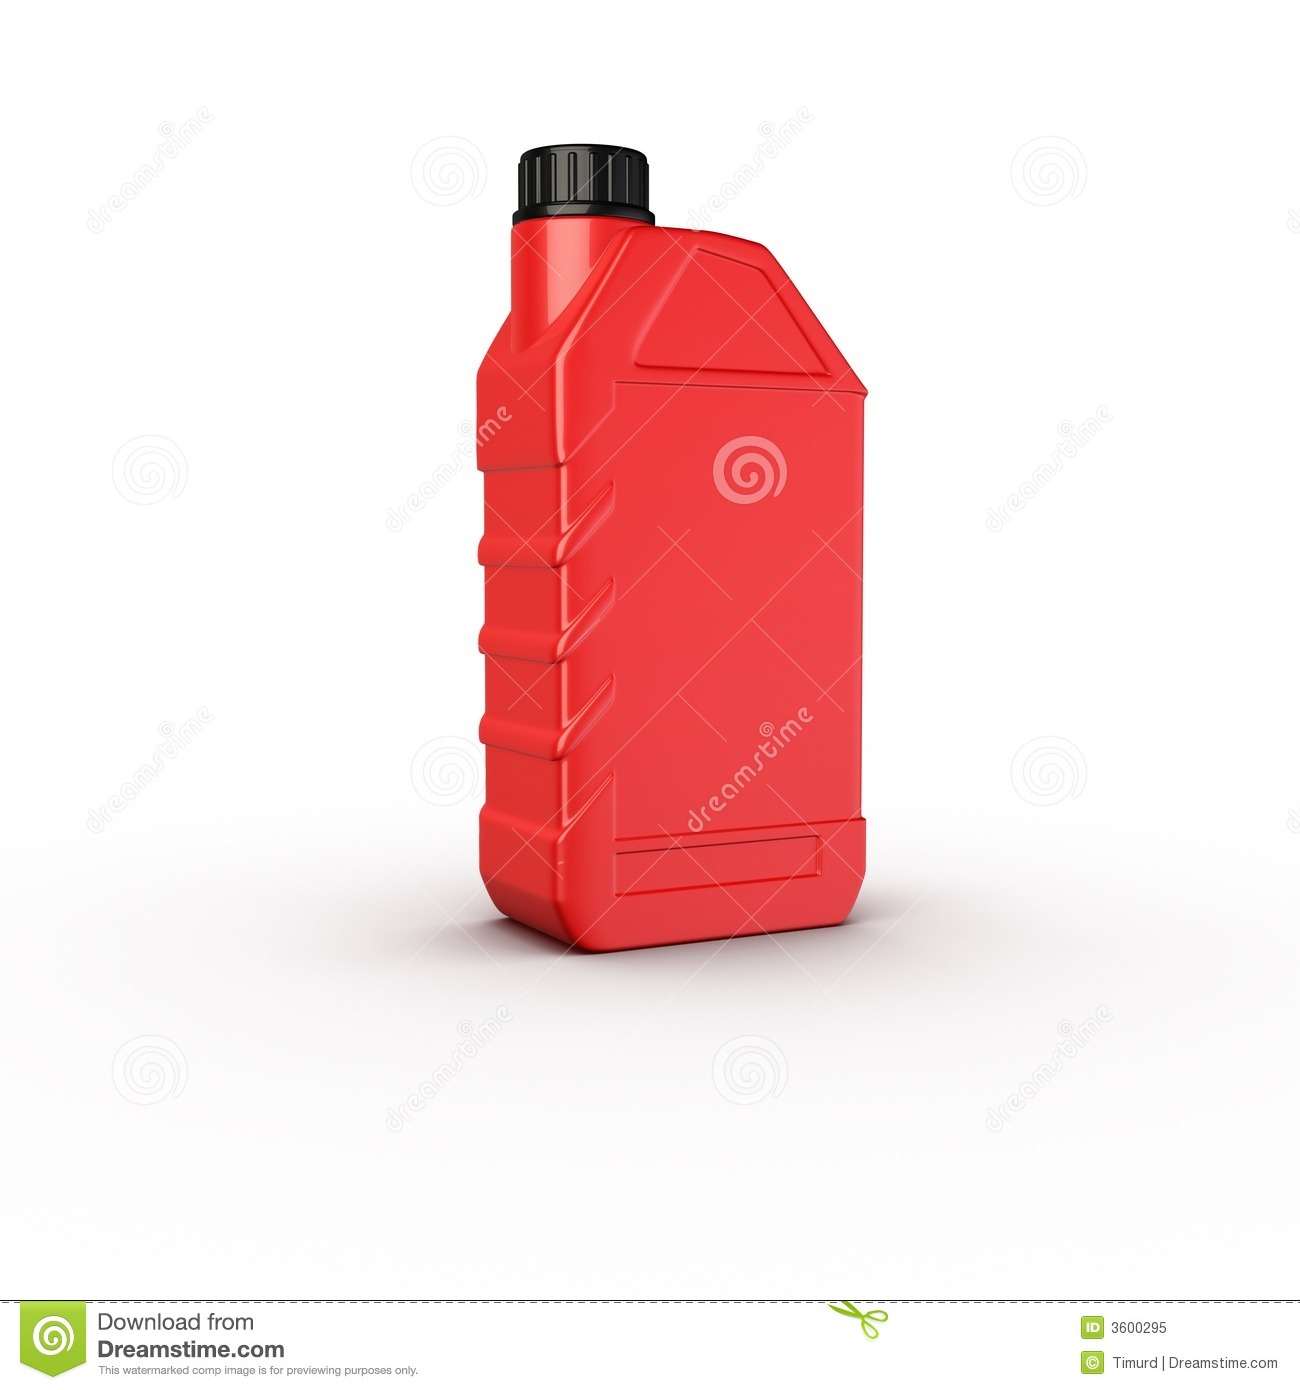 Container Motor Oil Bottle Royalty Free Stock Photo   Image  3600295